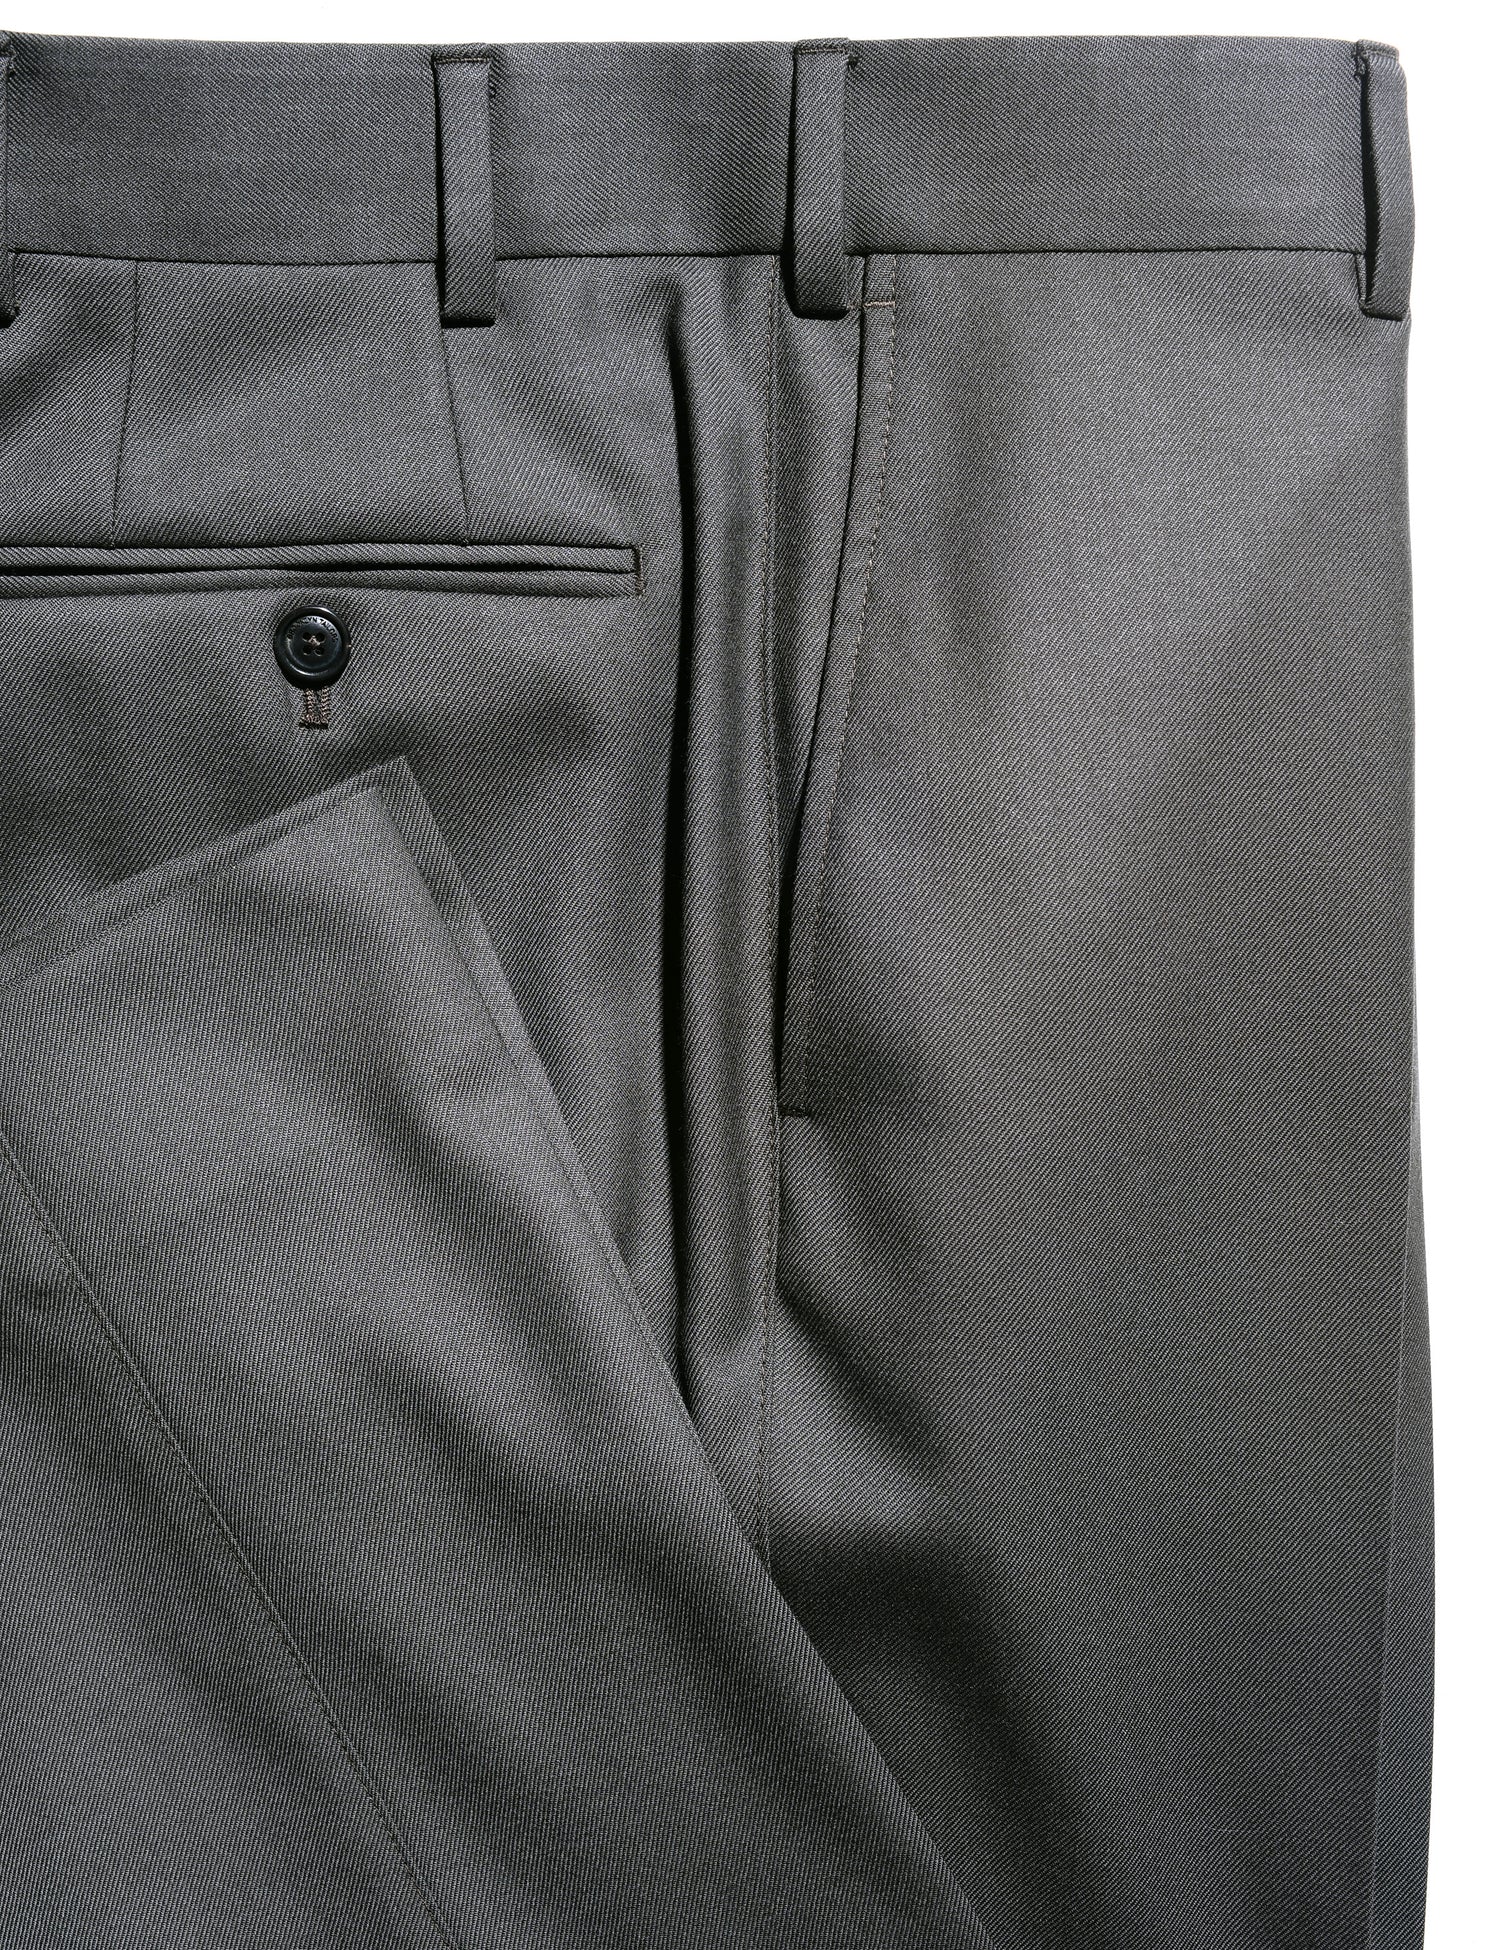 Side detail shot of Brooklyn Tailors BKT36 Straight Leg Trouser in Sturdy Wool Twill - Shale showing waistband, back pocket, side pocket, and hem